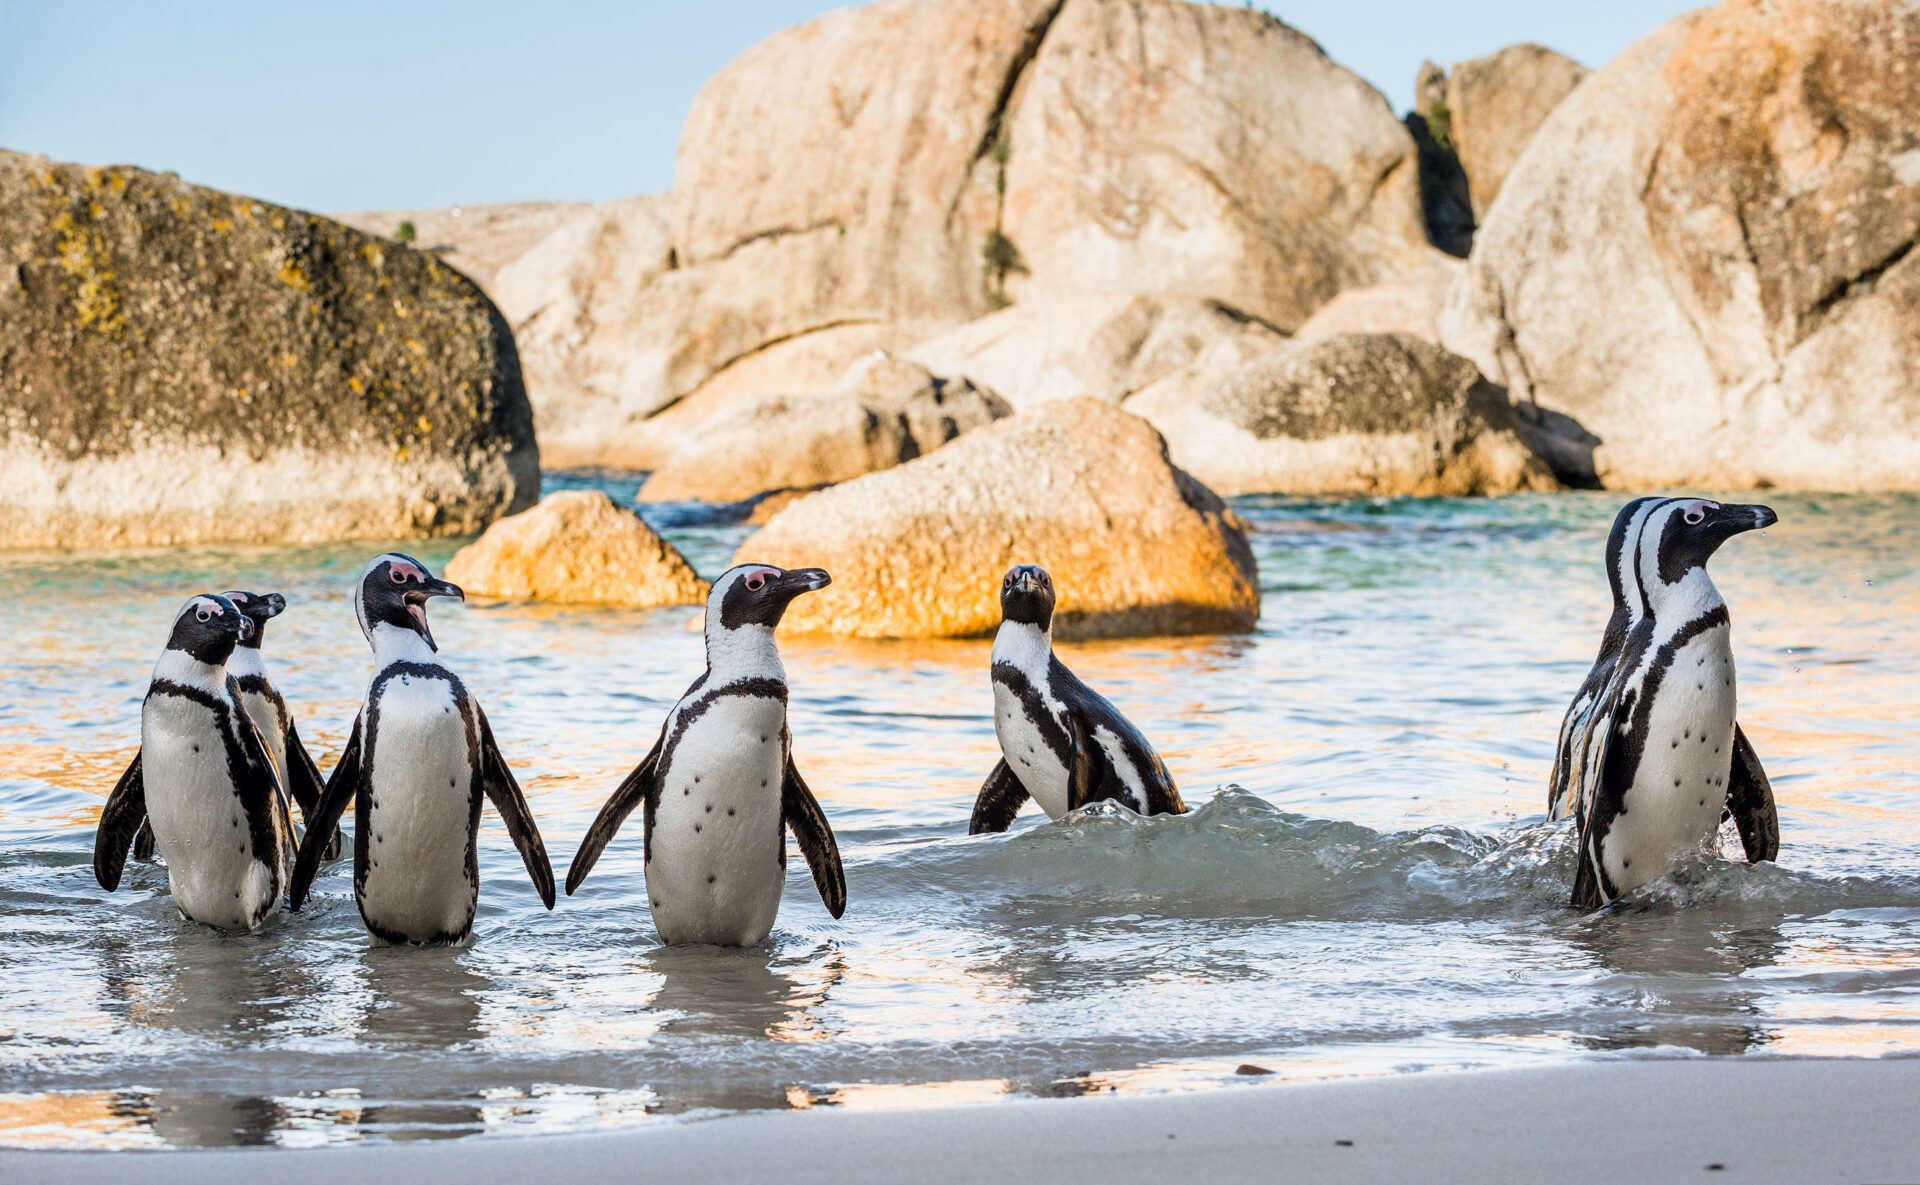 African penguins at Boulders Beach - one of the things to see and do in Cape Town with kids.